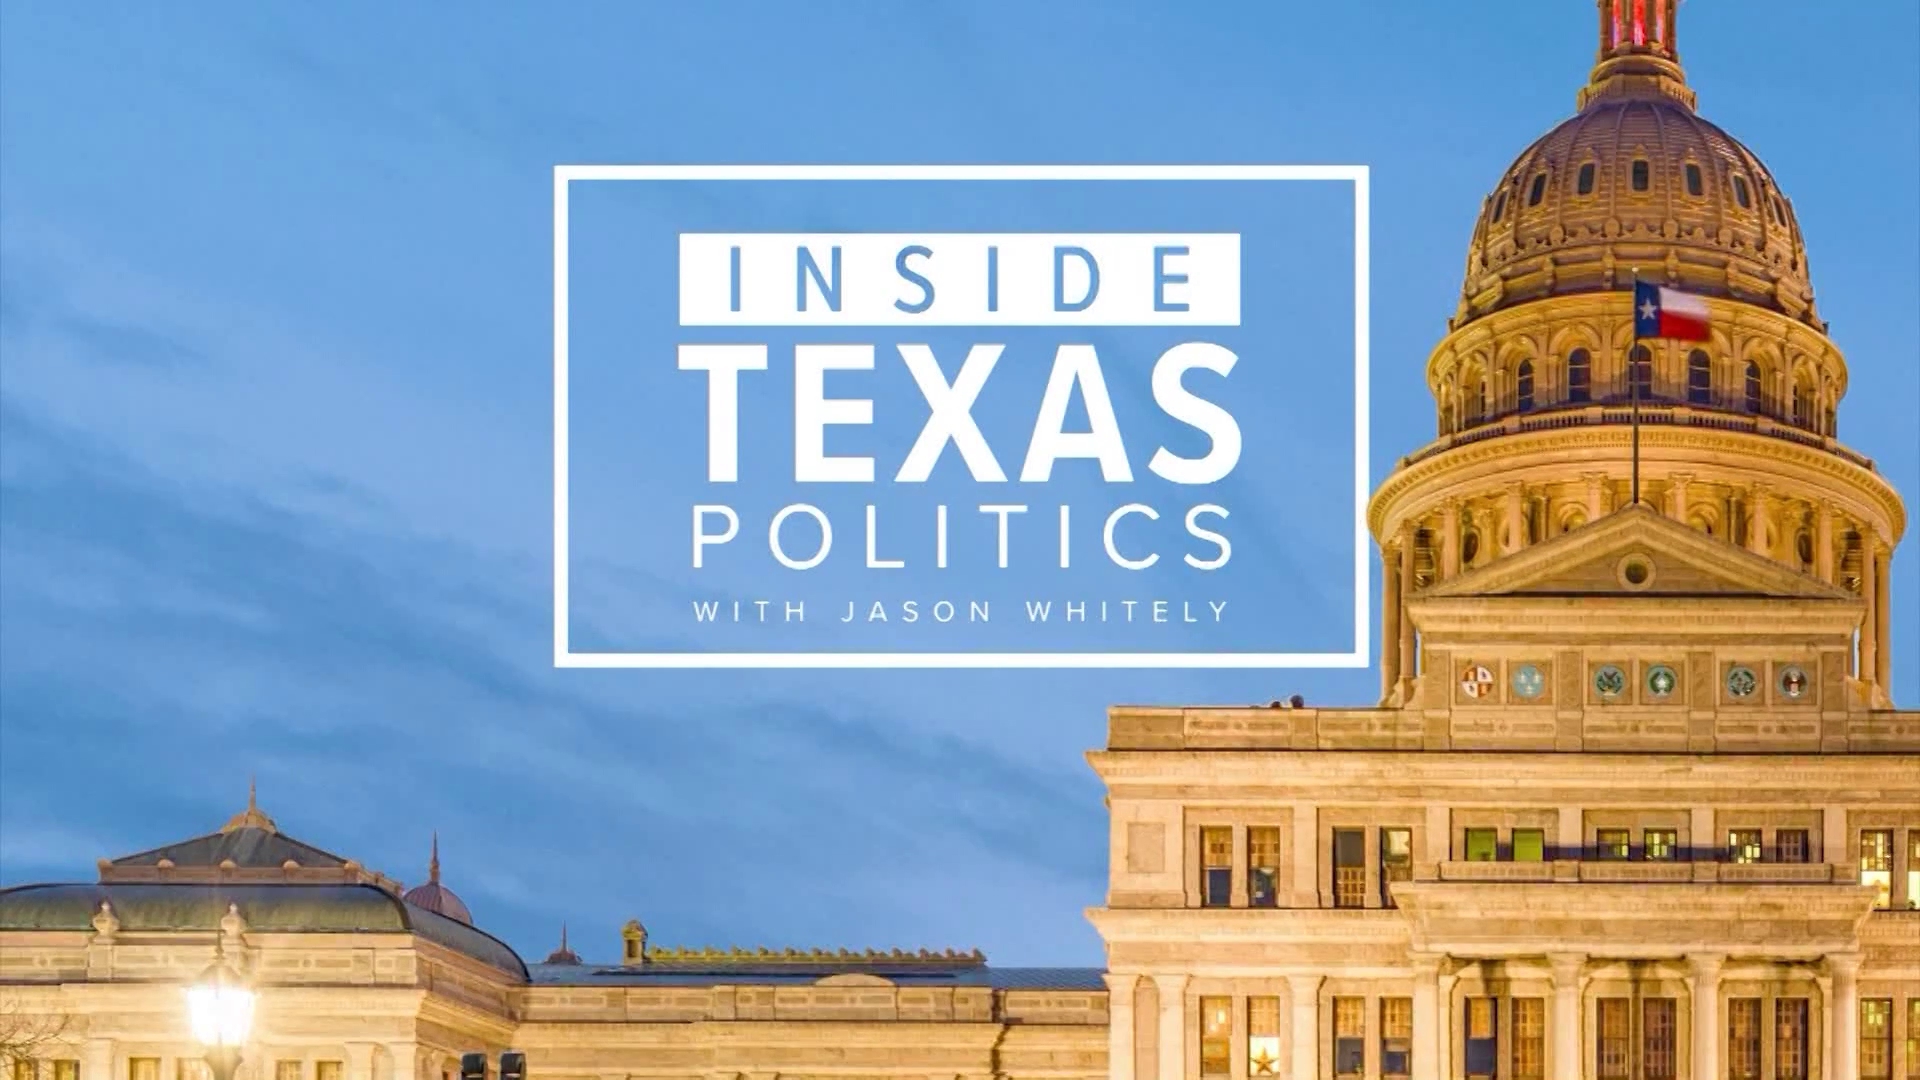 Republican Party of Texas Chairman Abraham George says he thinks the party has an issue with some elected officials, but conservatives are not necessarily divided.